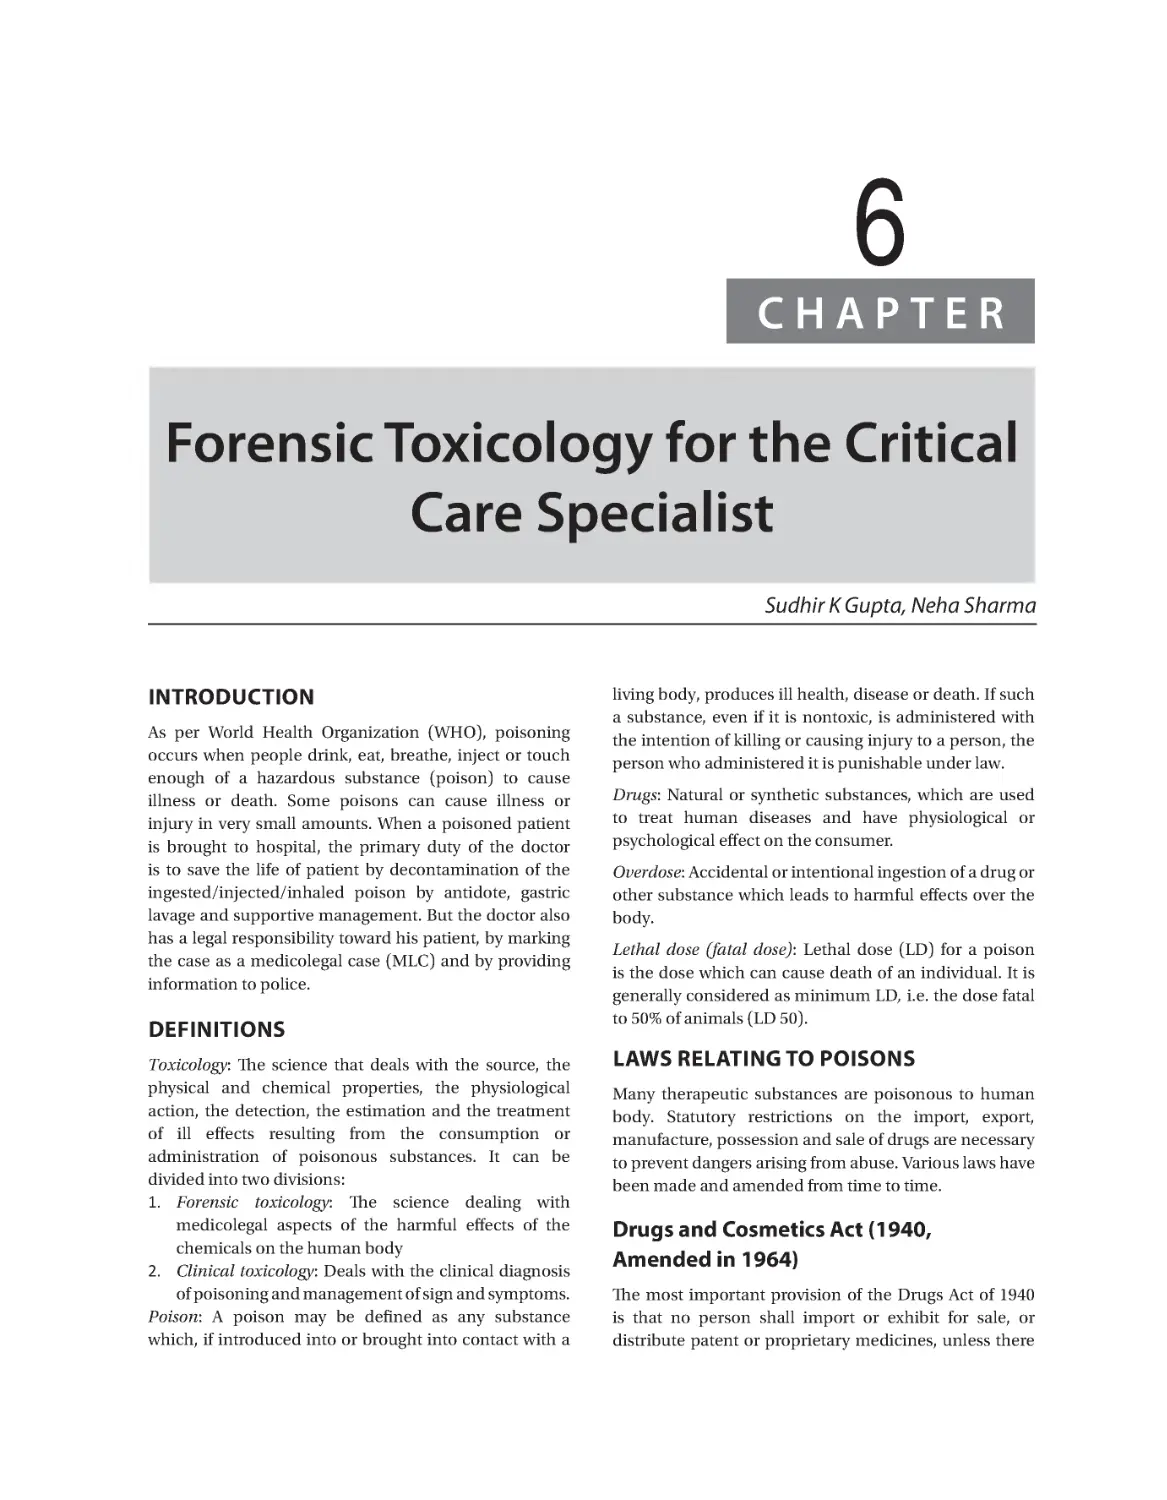 Chapter 6: Forensic Toxicology for the Critical Care Specialist